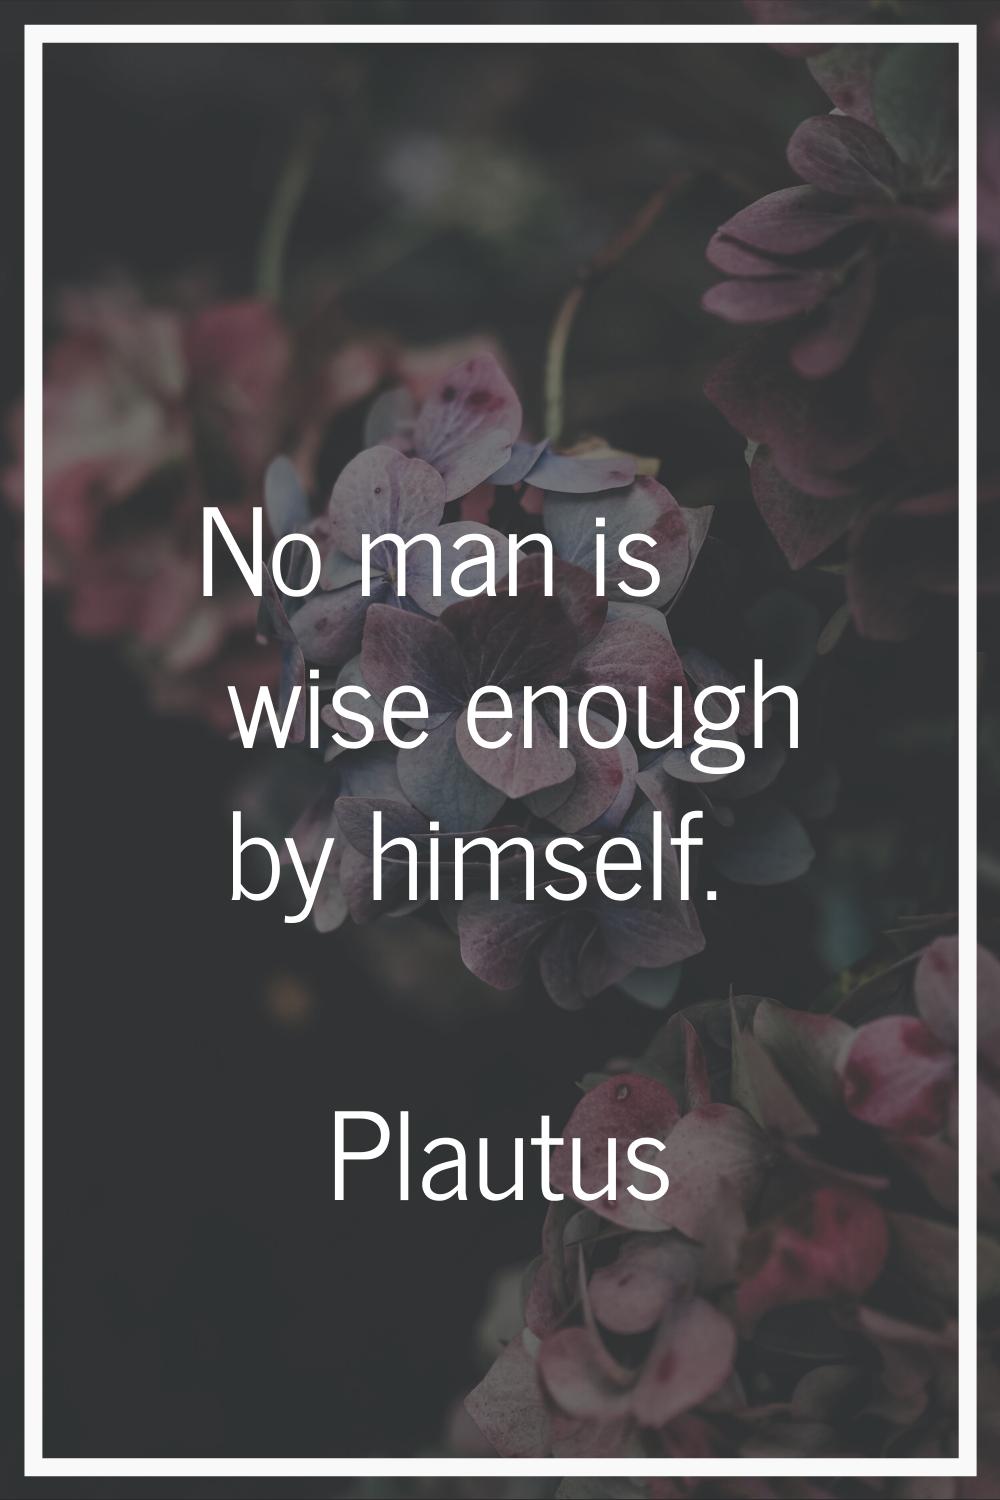 No man is wise enough by himself.